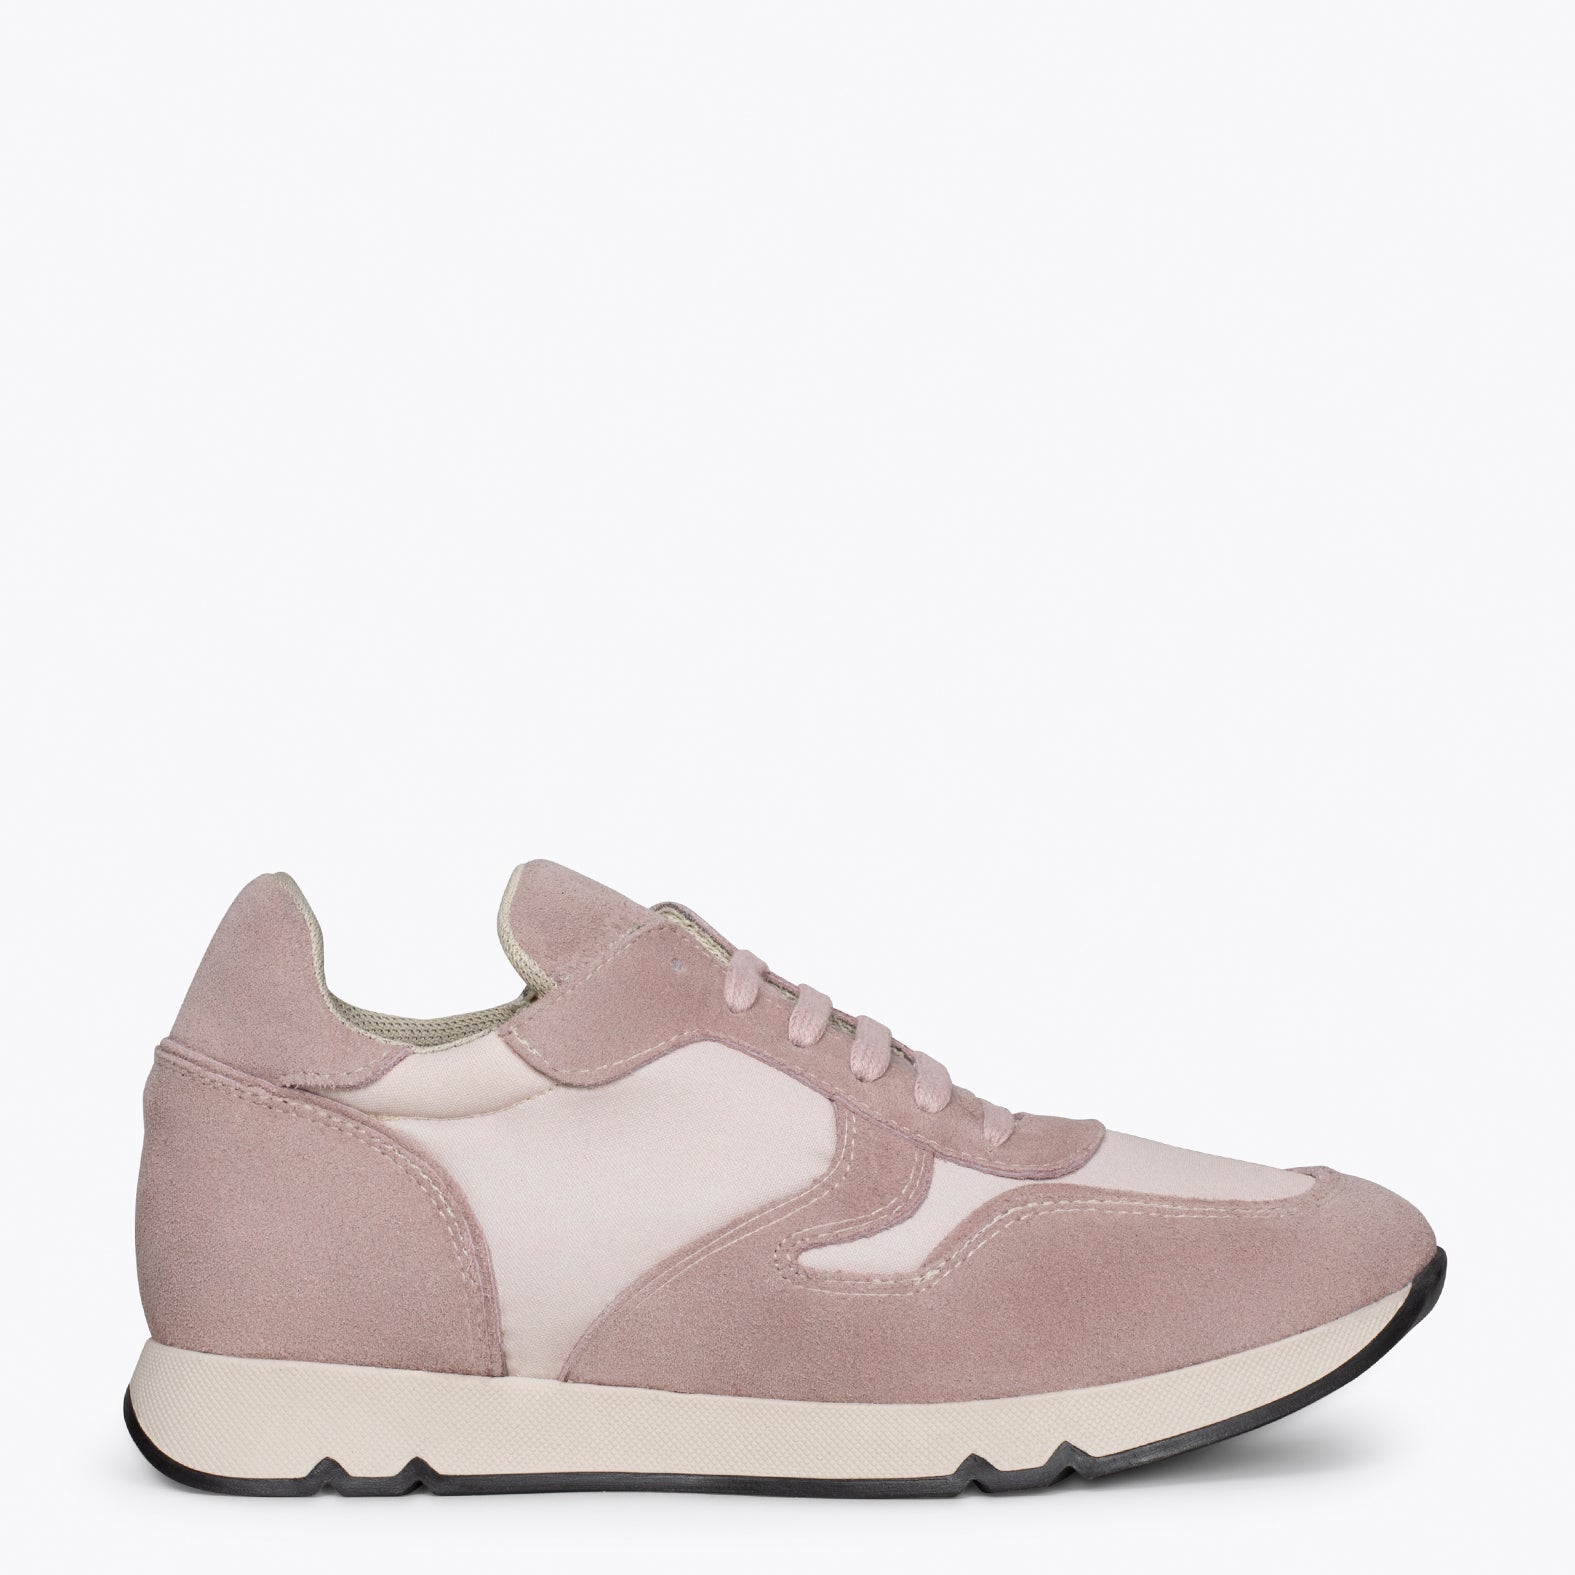 SPORTS – PINK sneakers for women